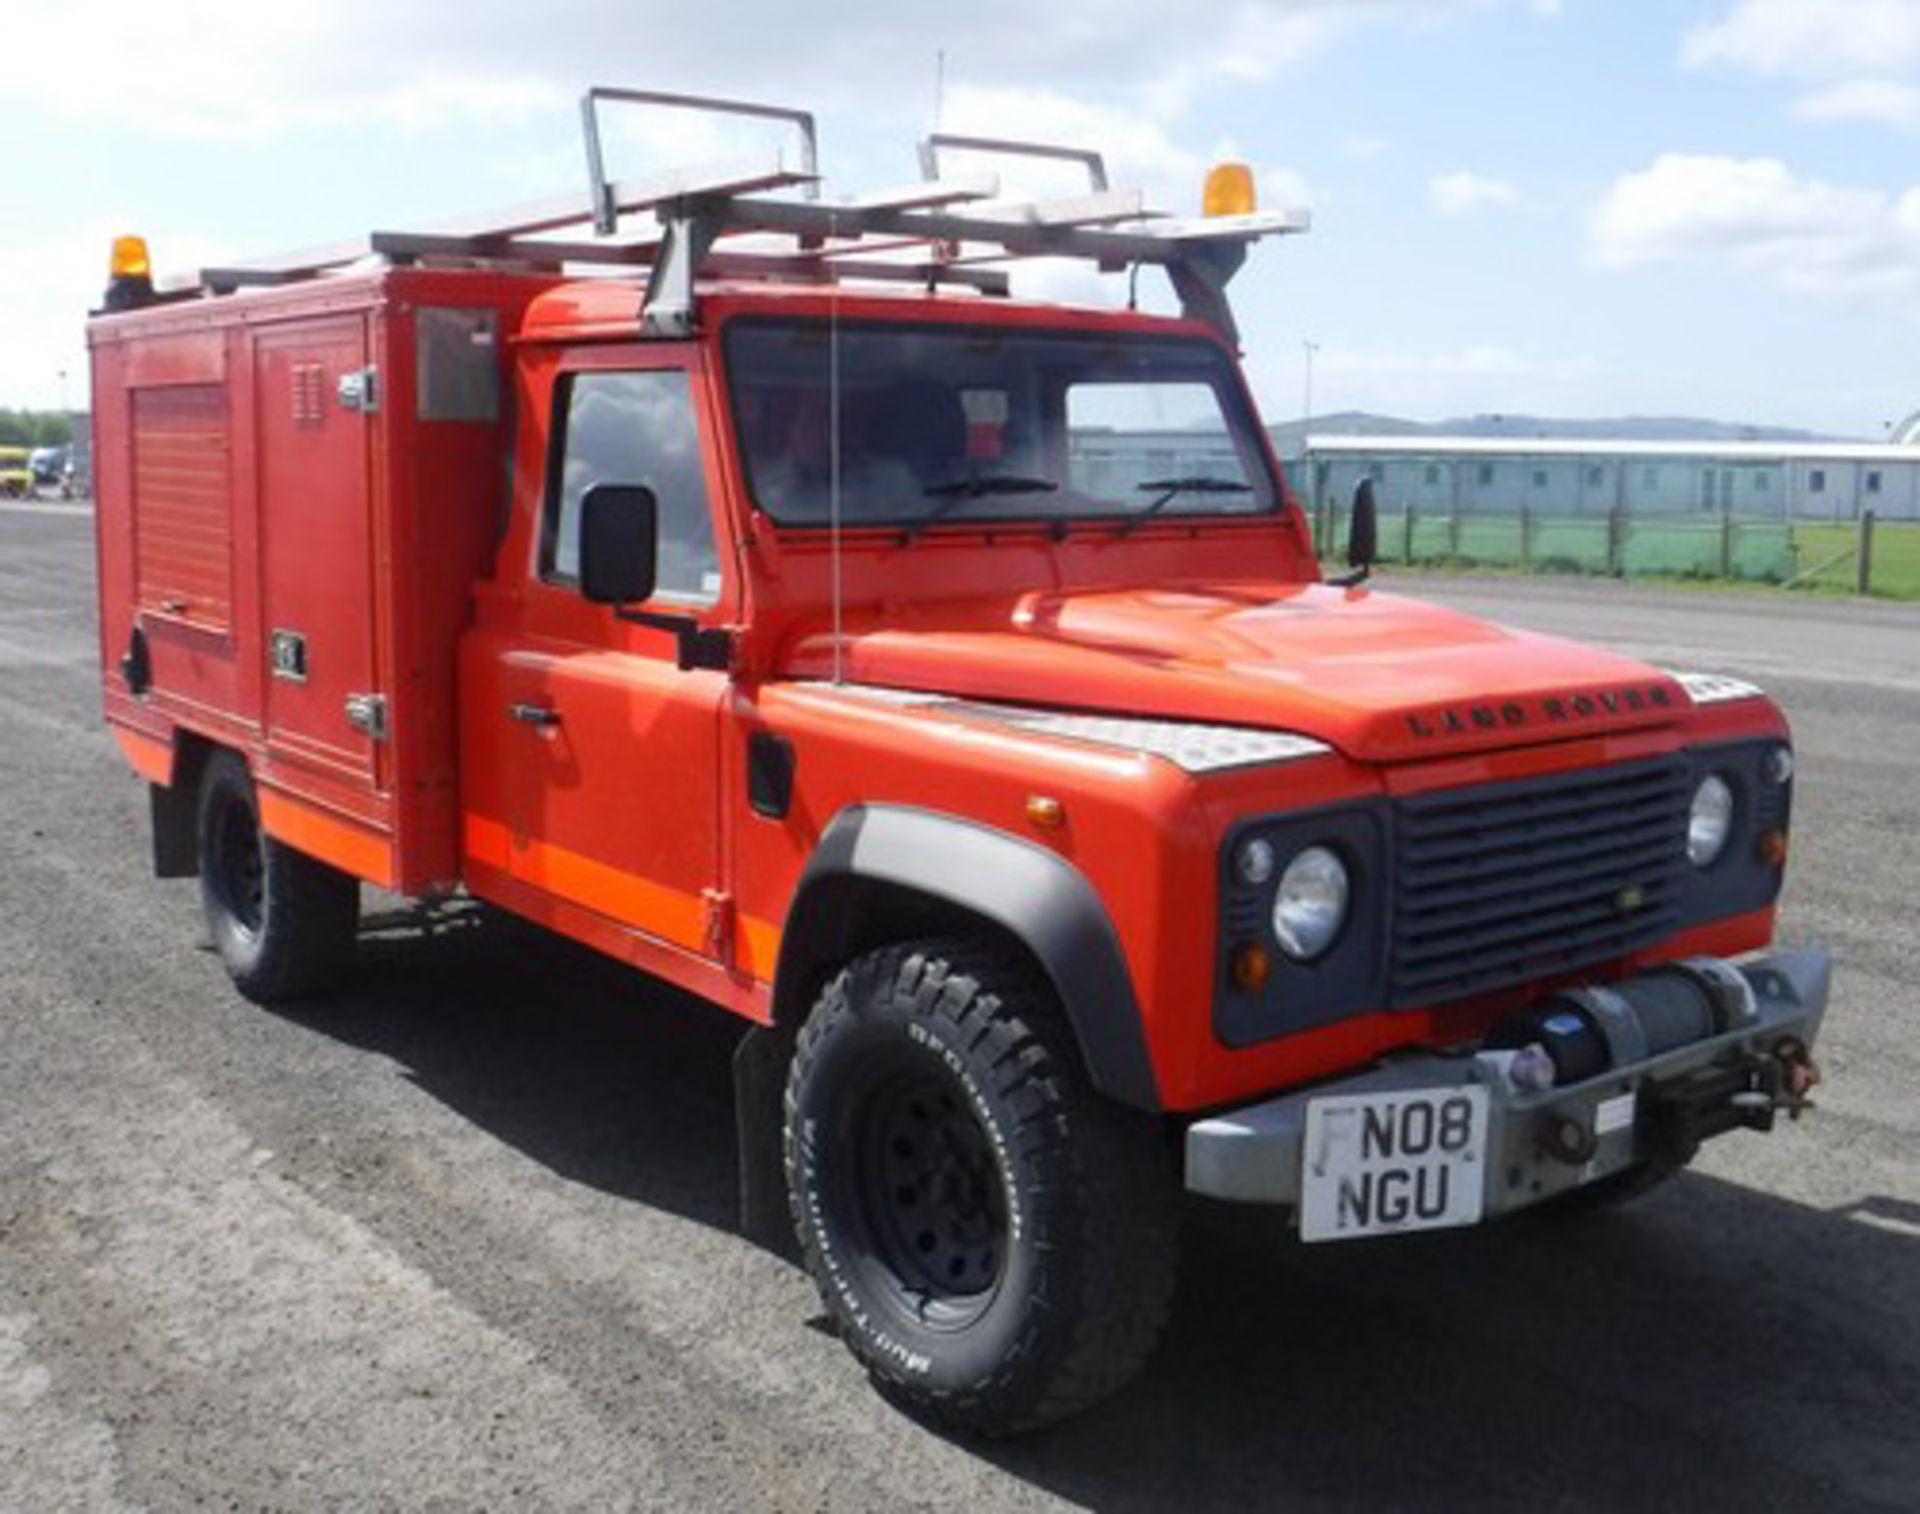 LAND ROVER DEFENDER 130 S/C - 2402cc - Image 20 of 26